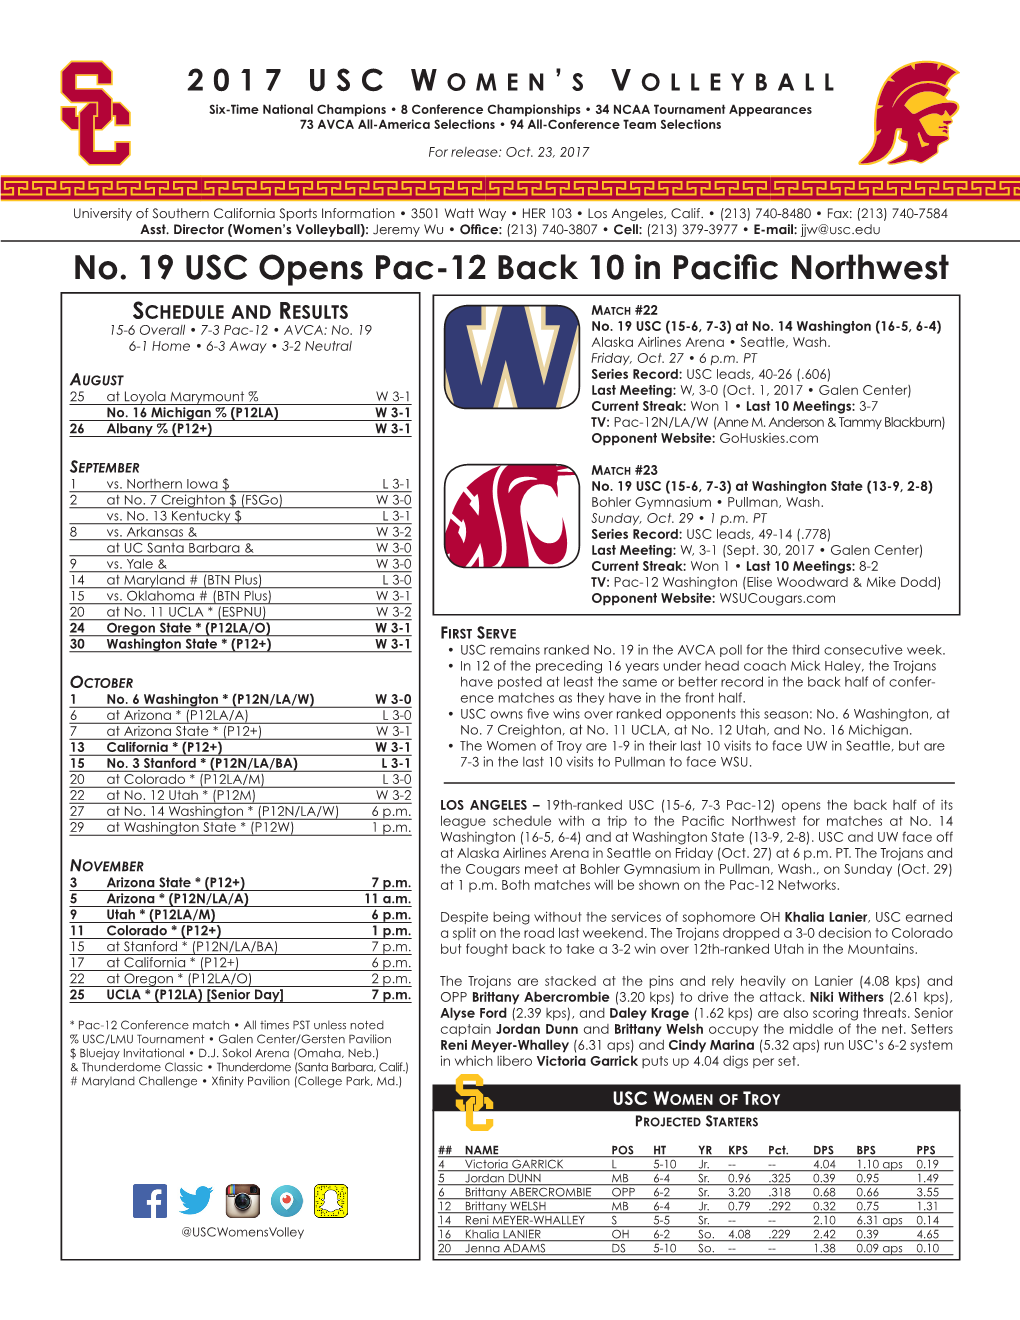 No. 19 USC Opens Pac-12 Back 10 in Pacific Northwest